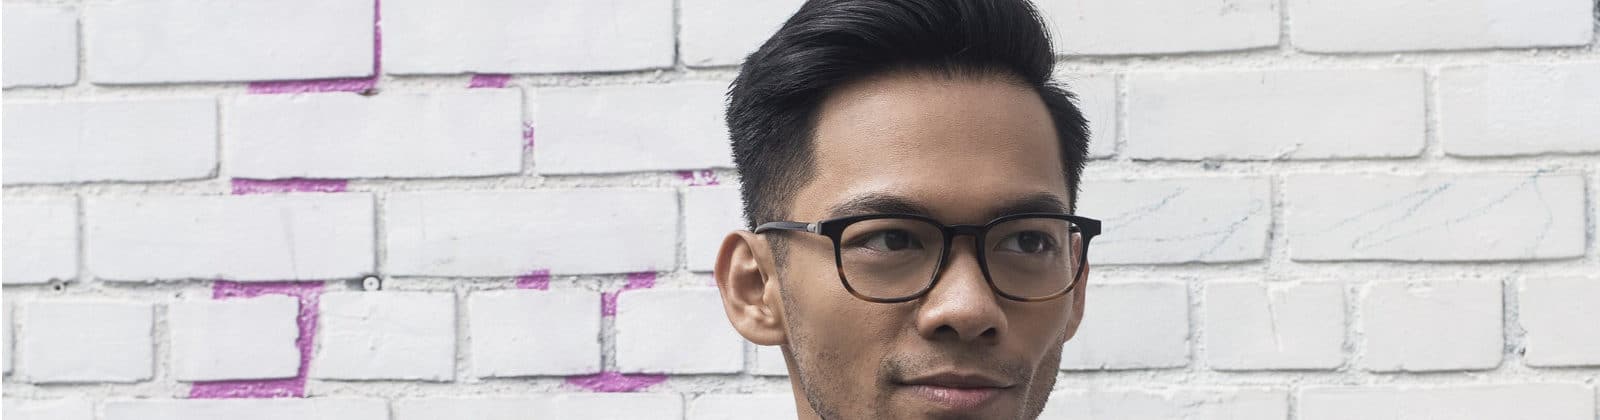 33 Trendy Asian Hairstyles For Men With All Hair Lengths 2020